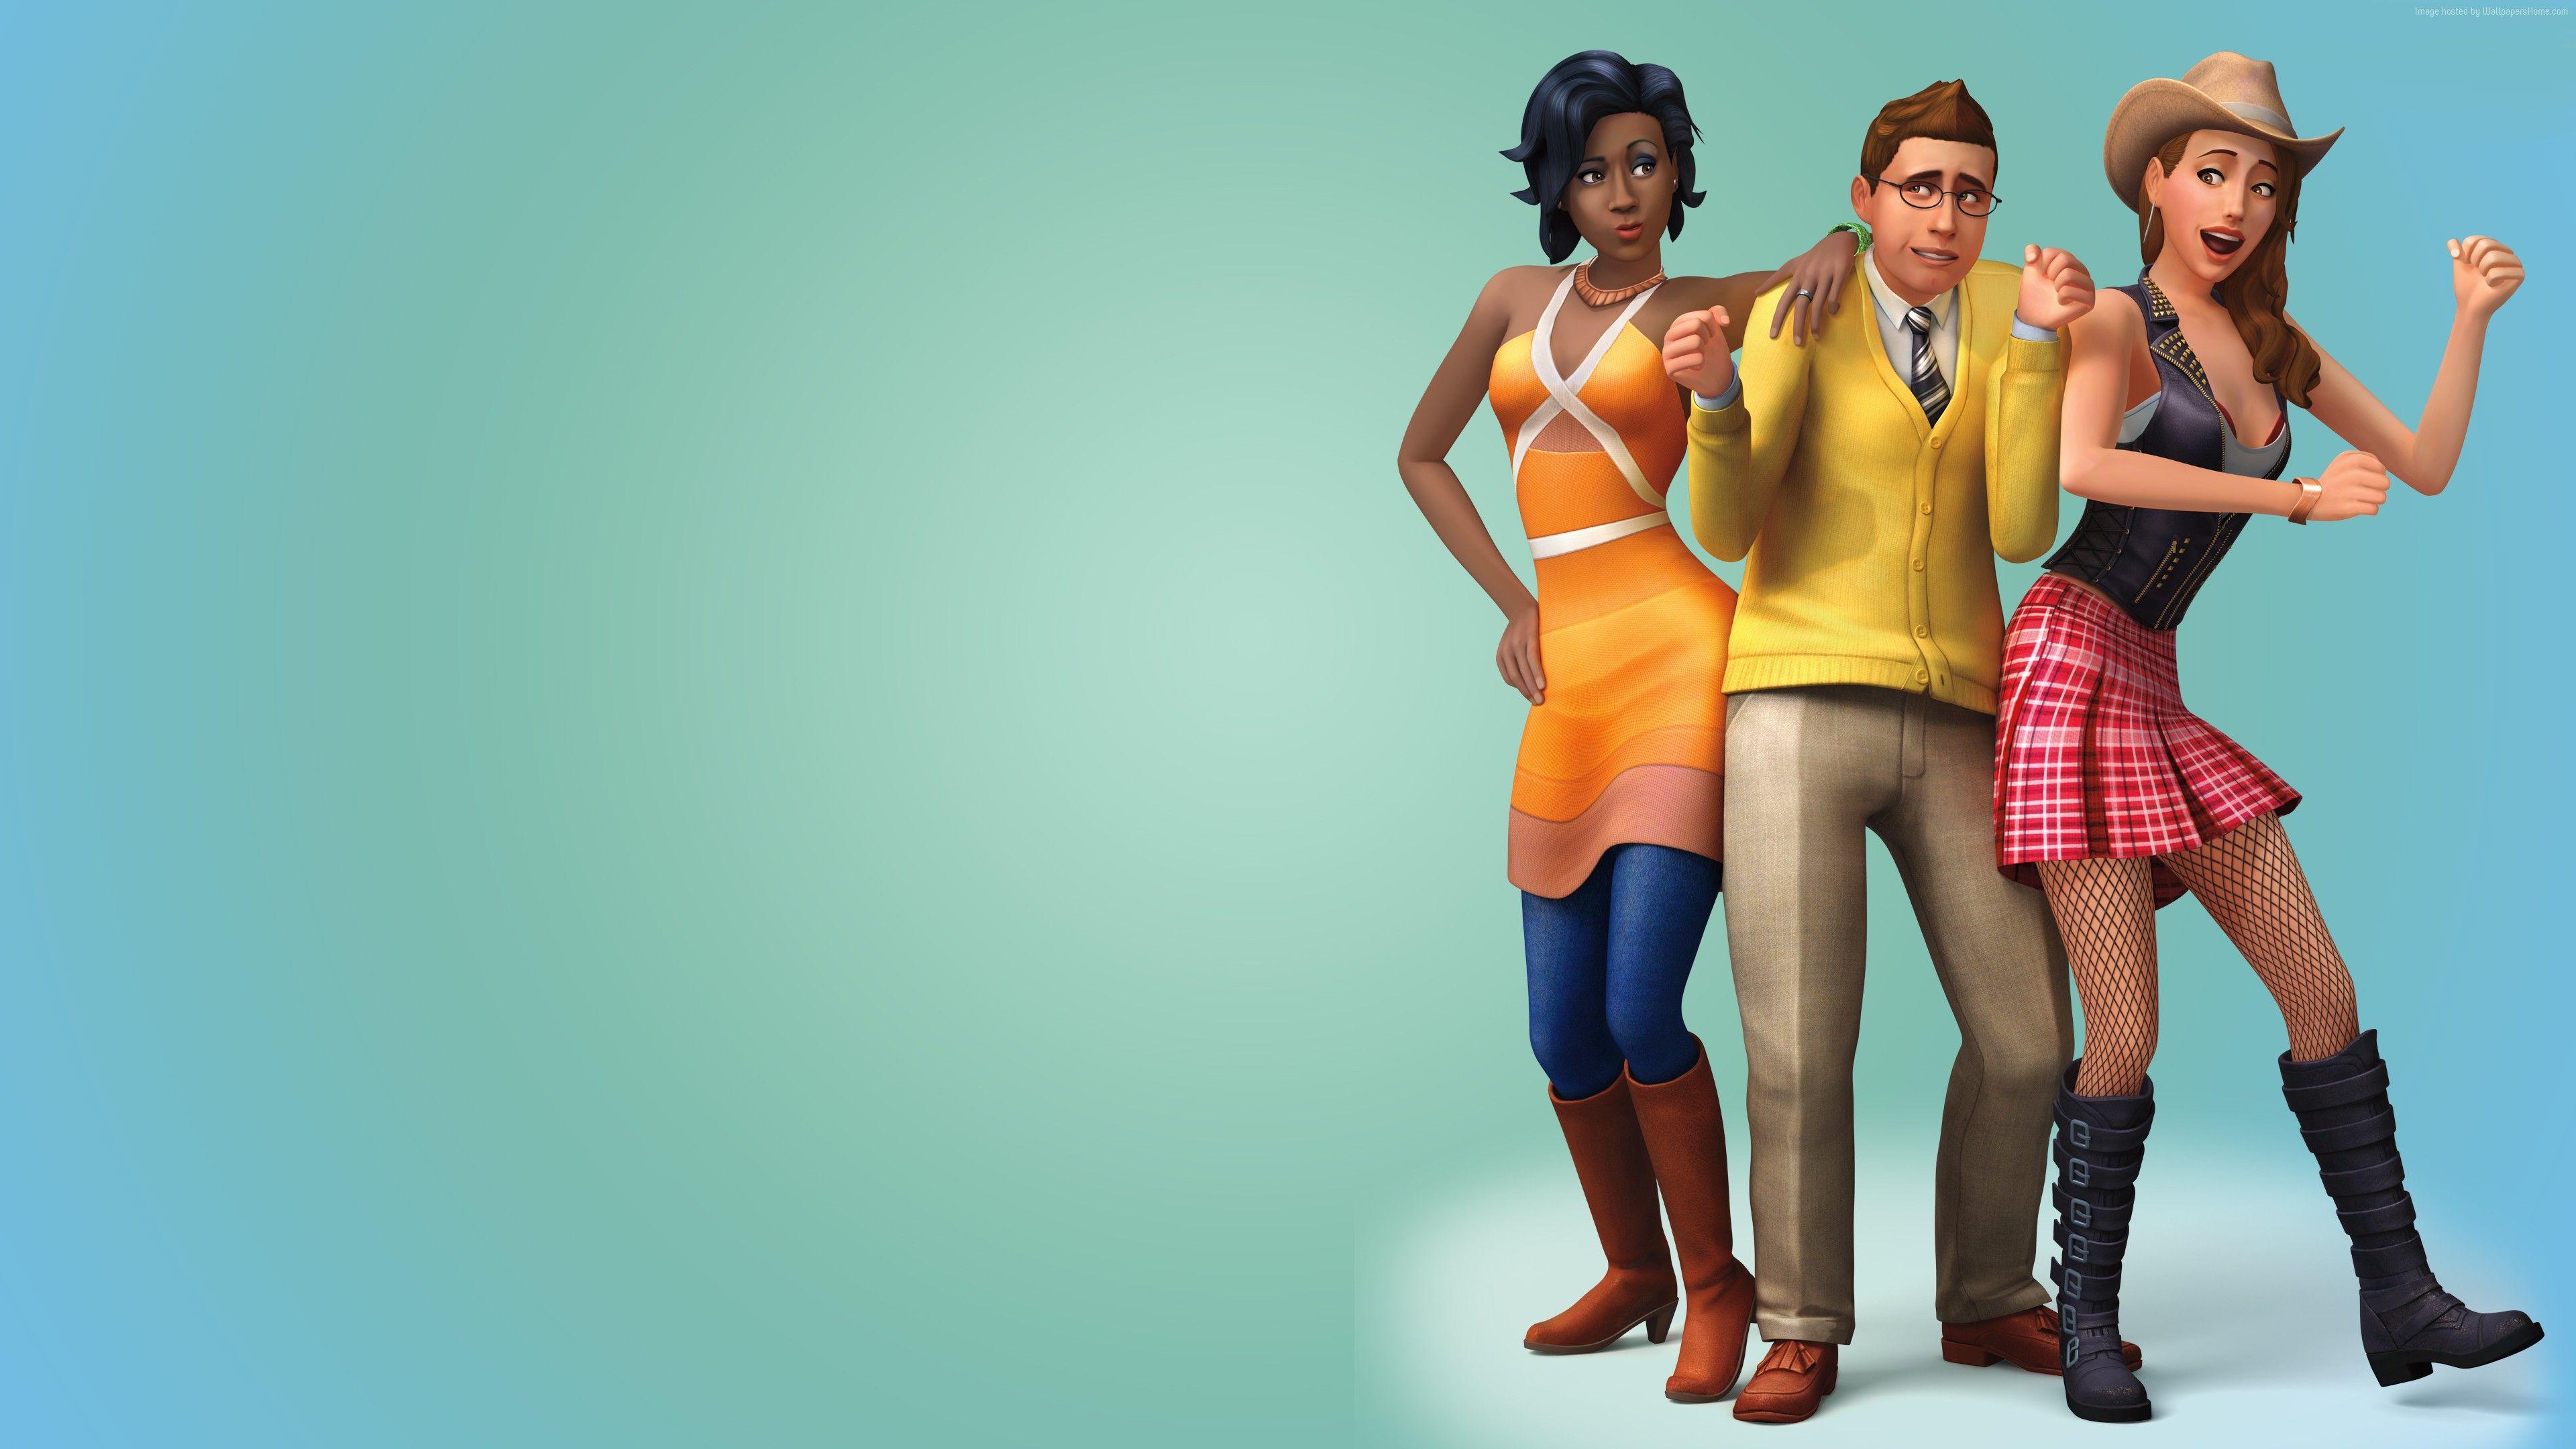 Wallpaper The Sims 4: Get to Work, Best Games game, PC